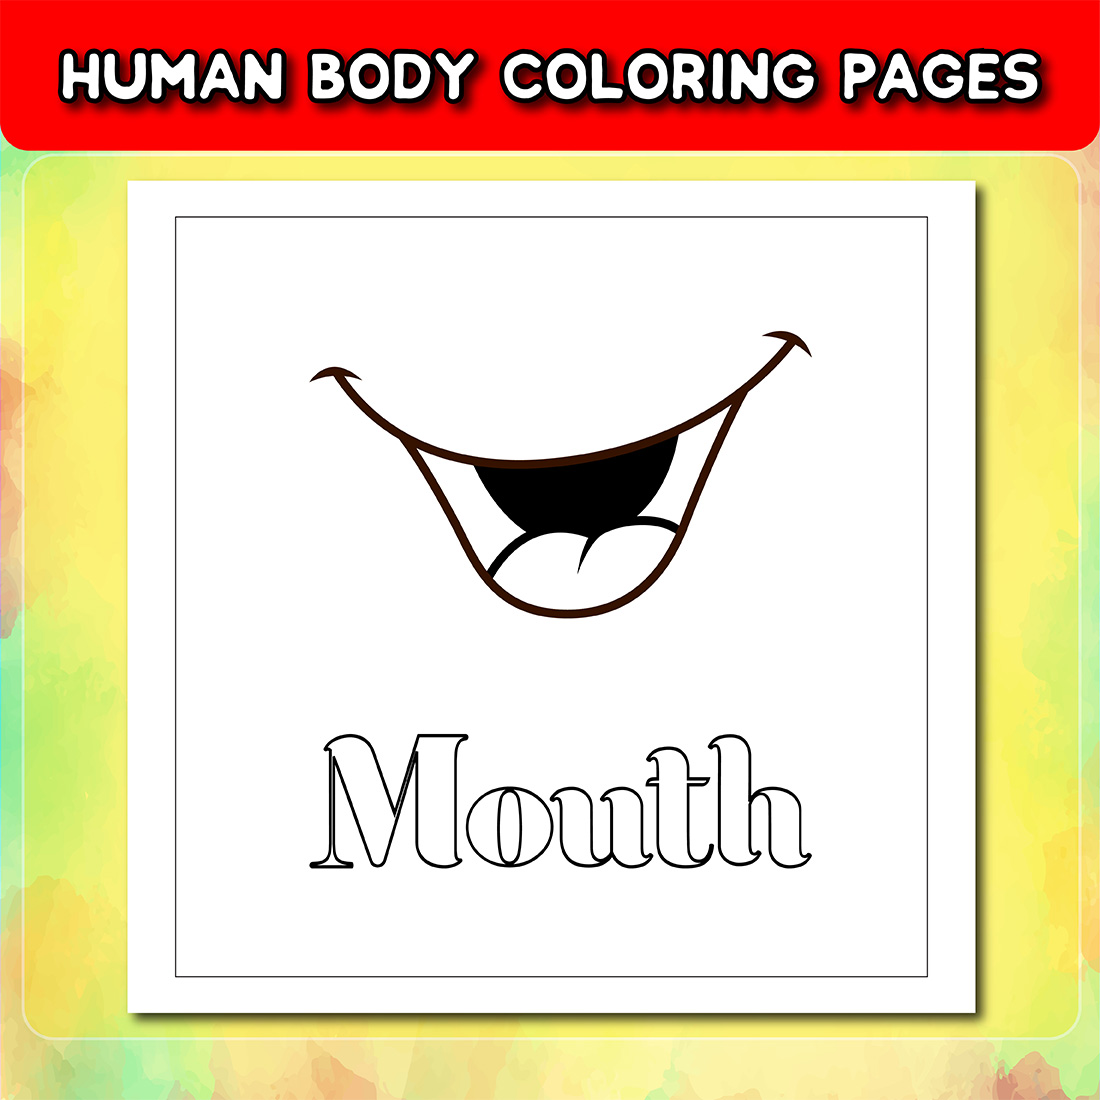 Human Body Coloring Pages for Kids